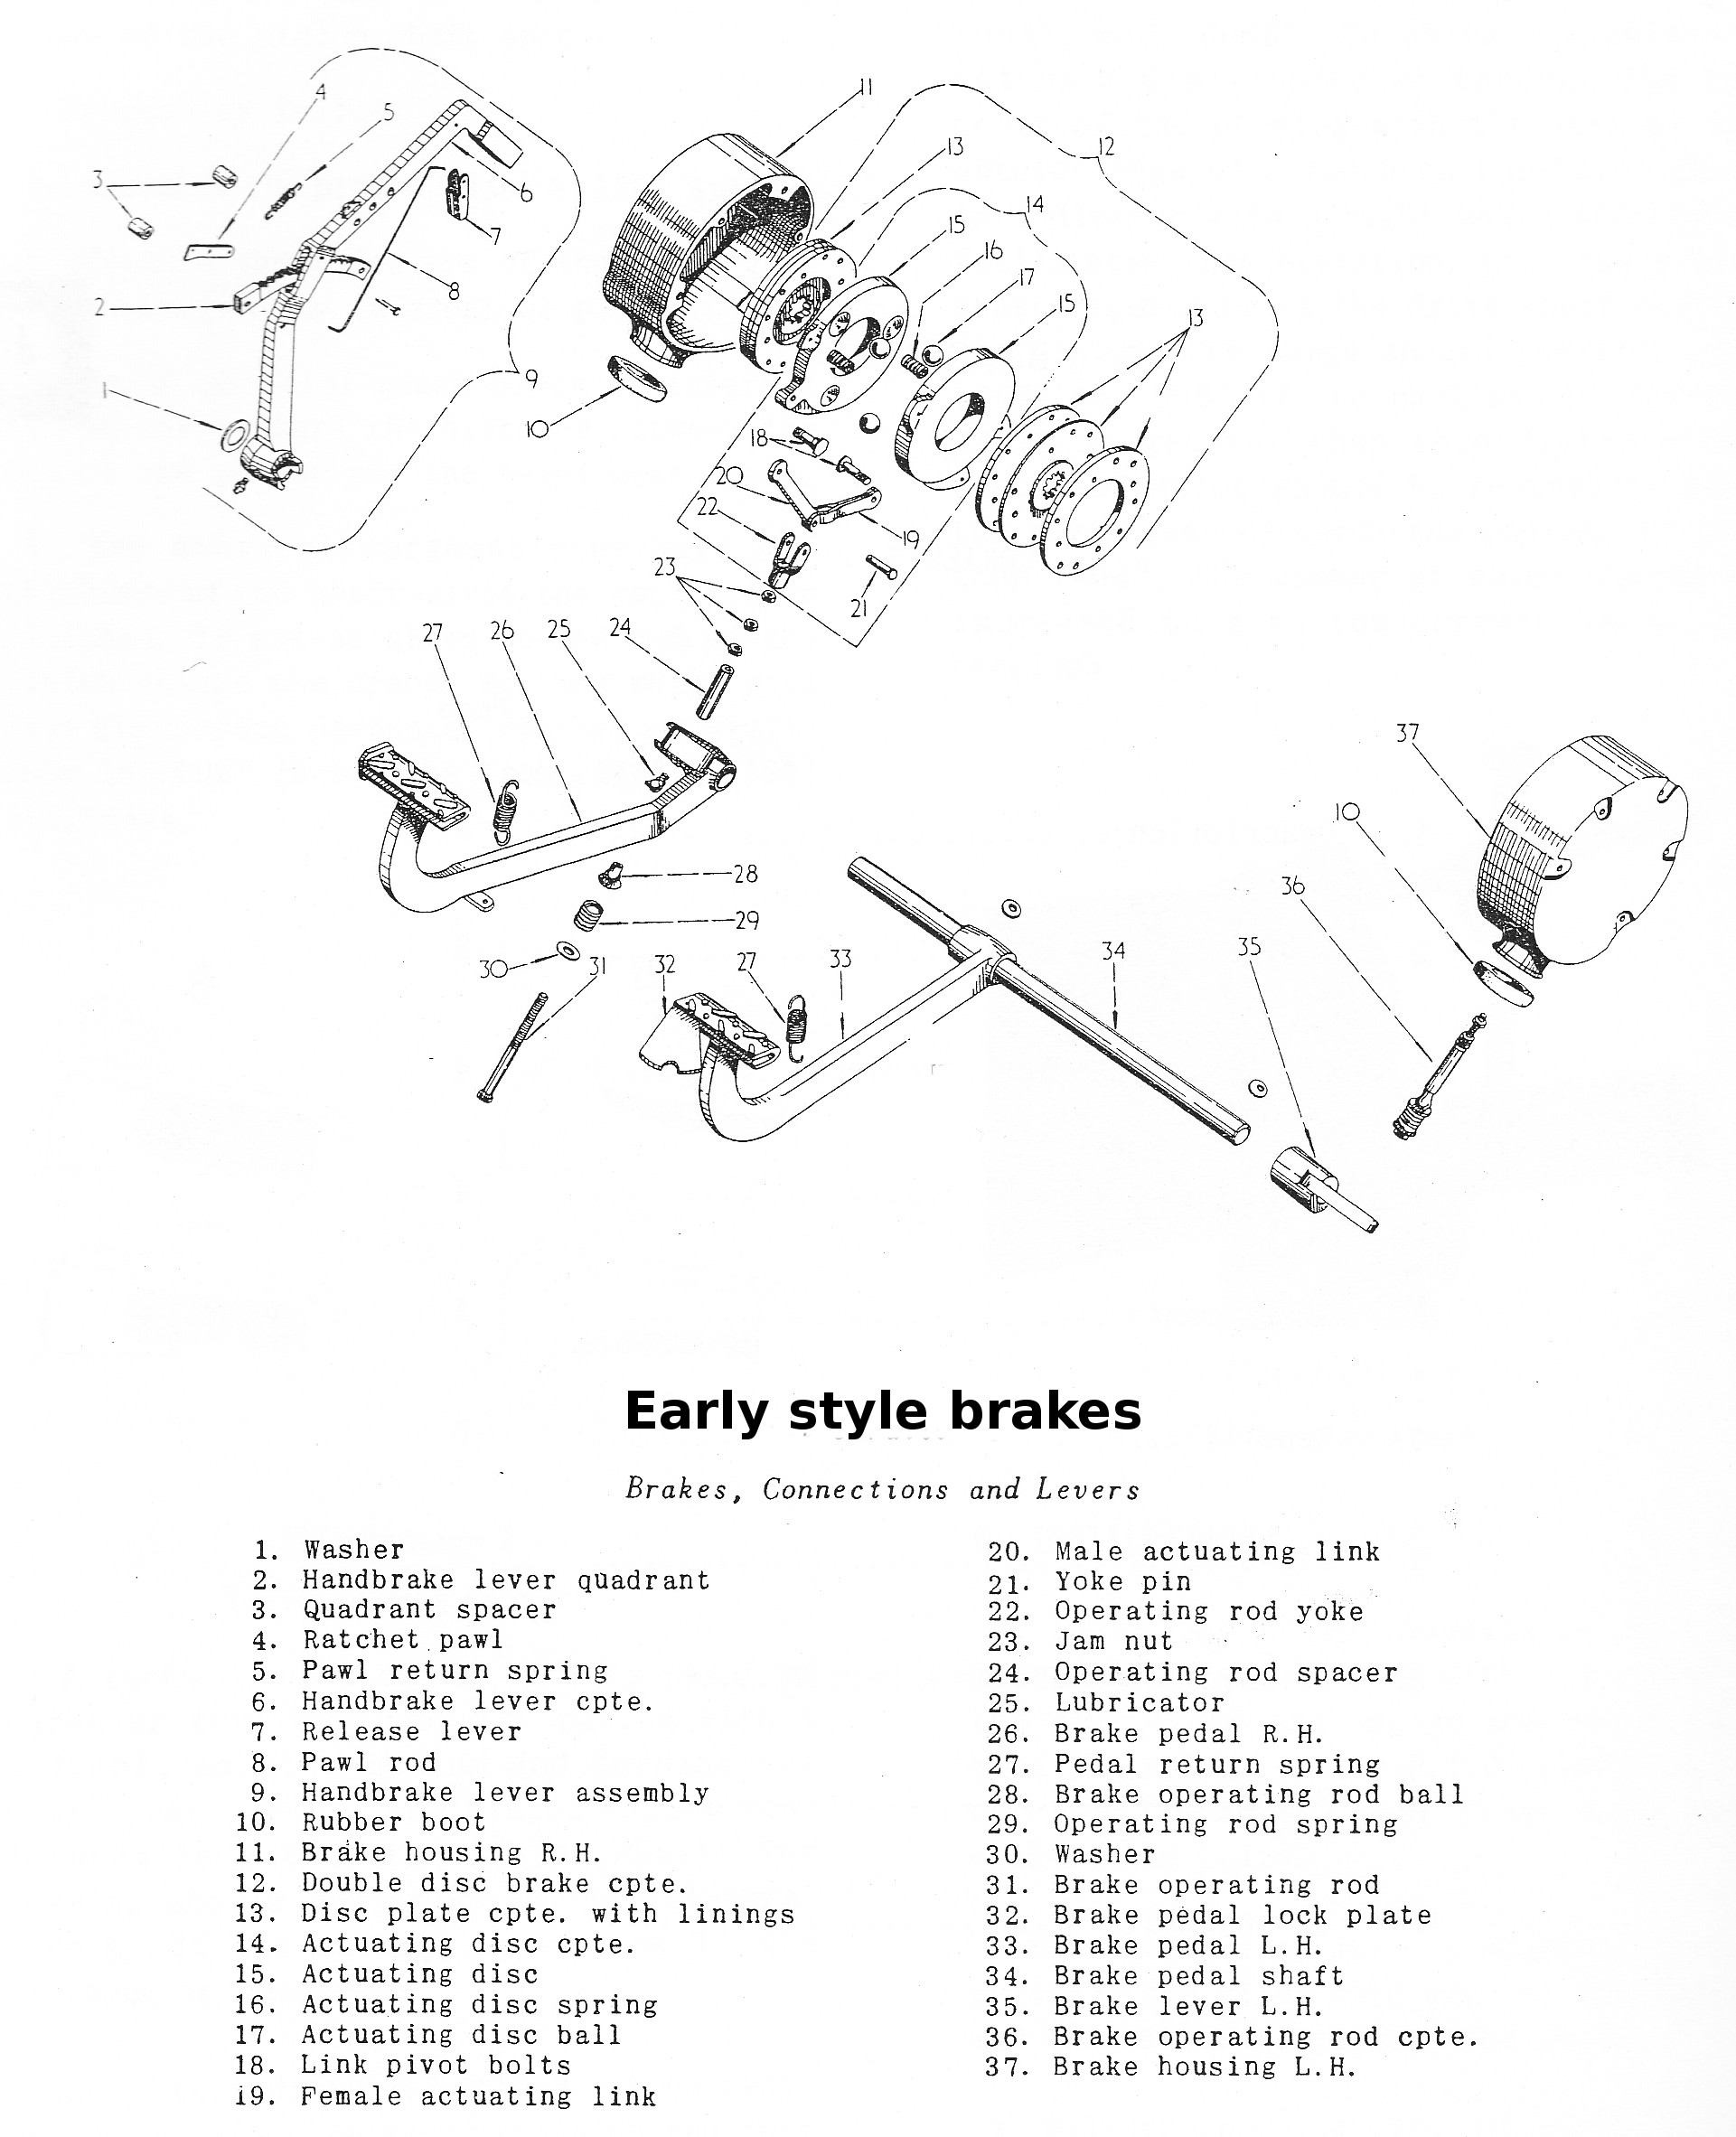 Early brakes - exploded parts